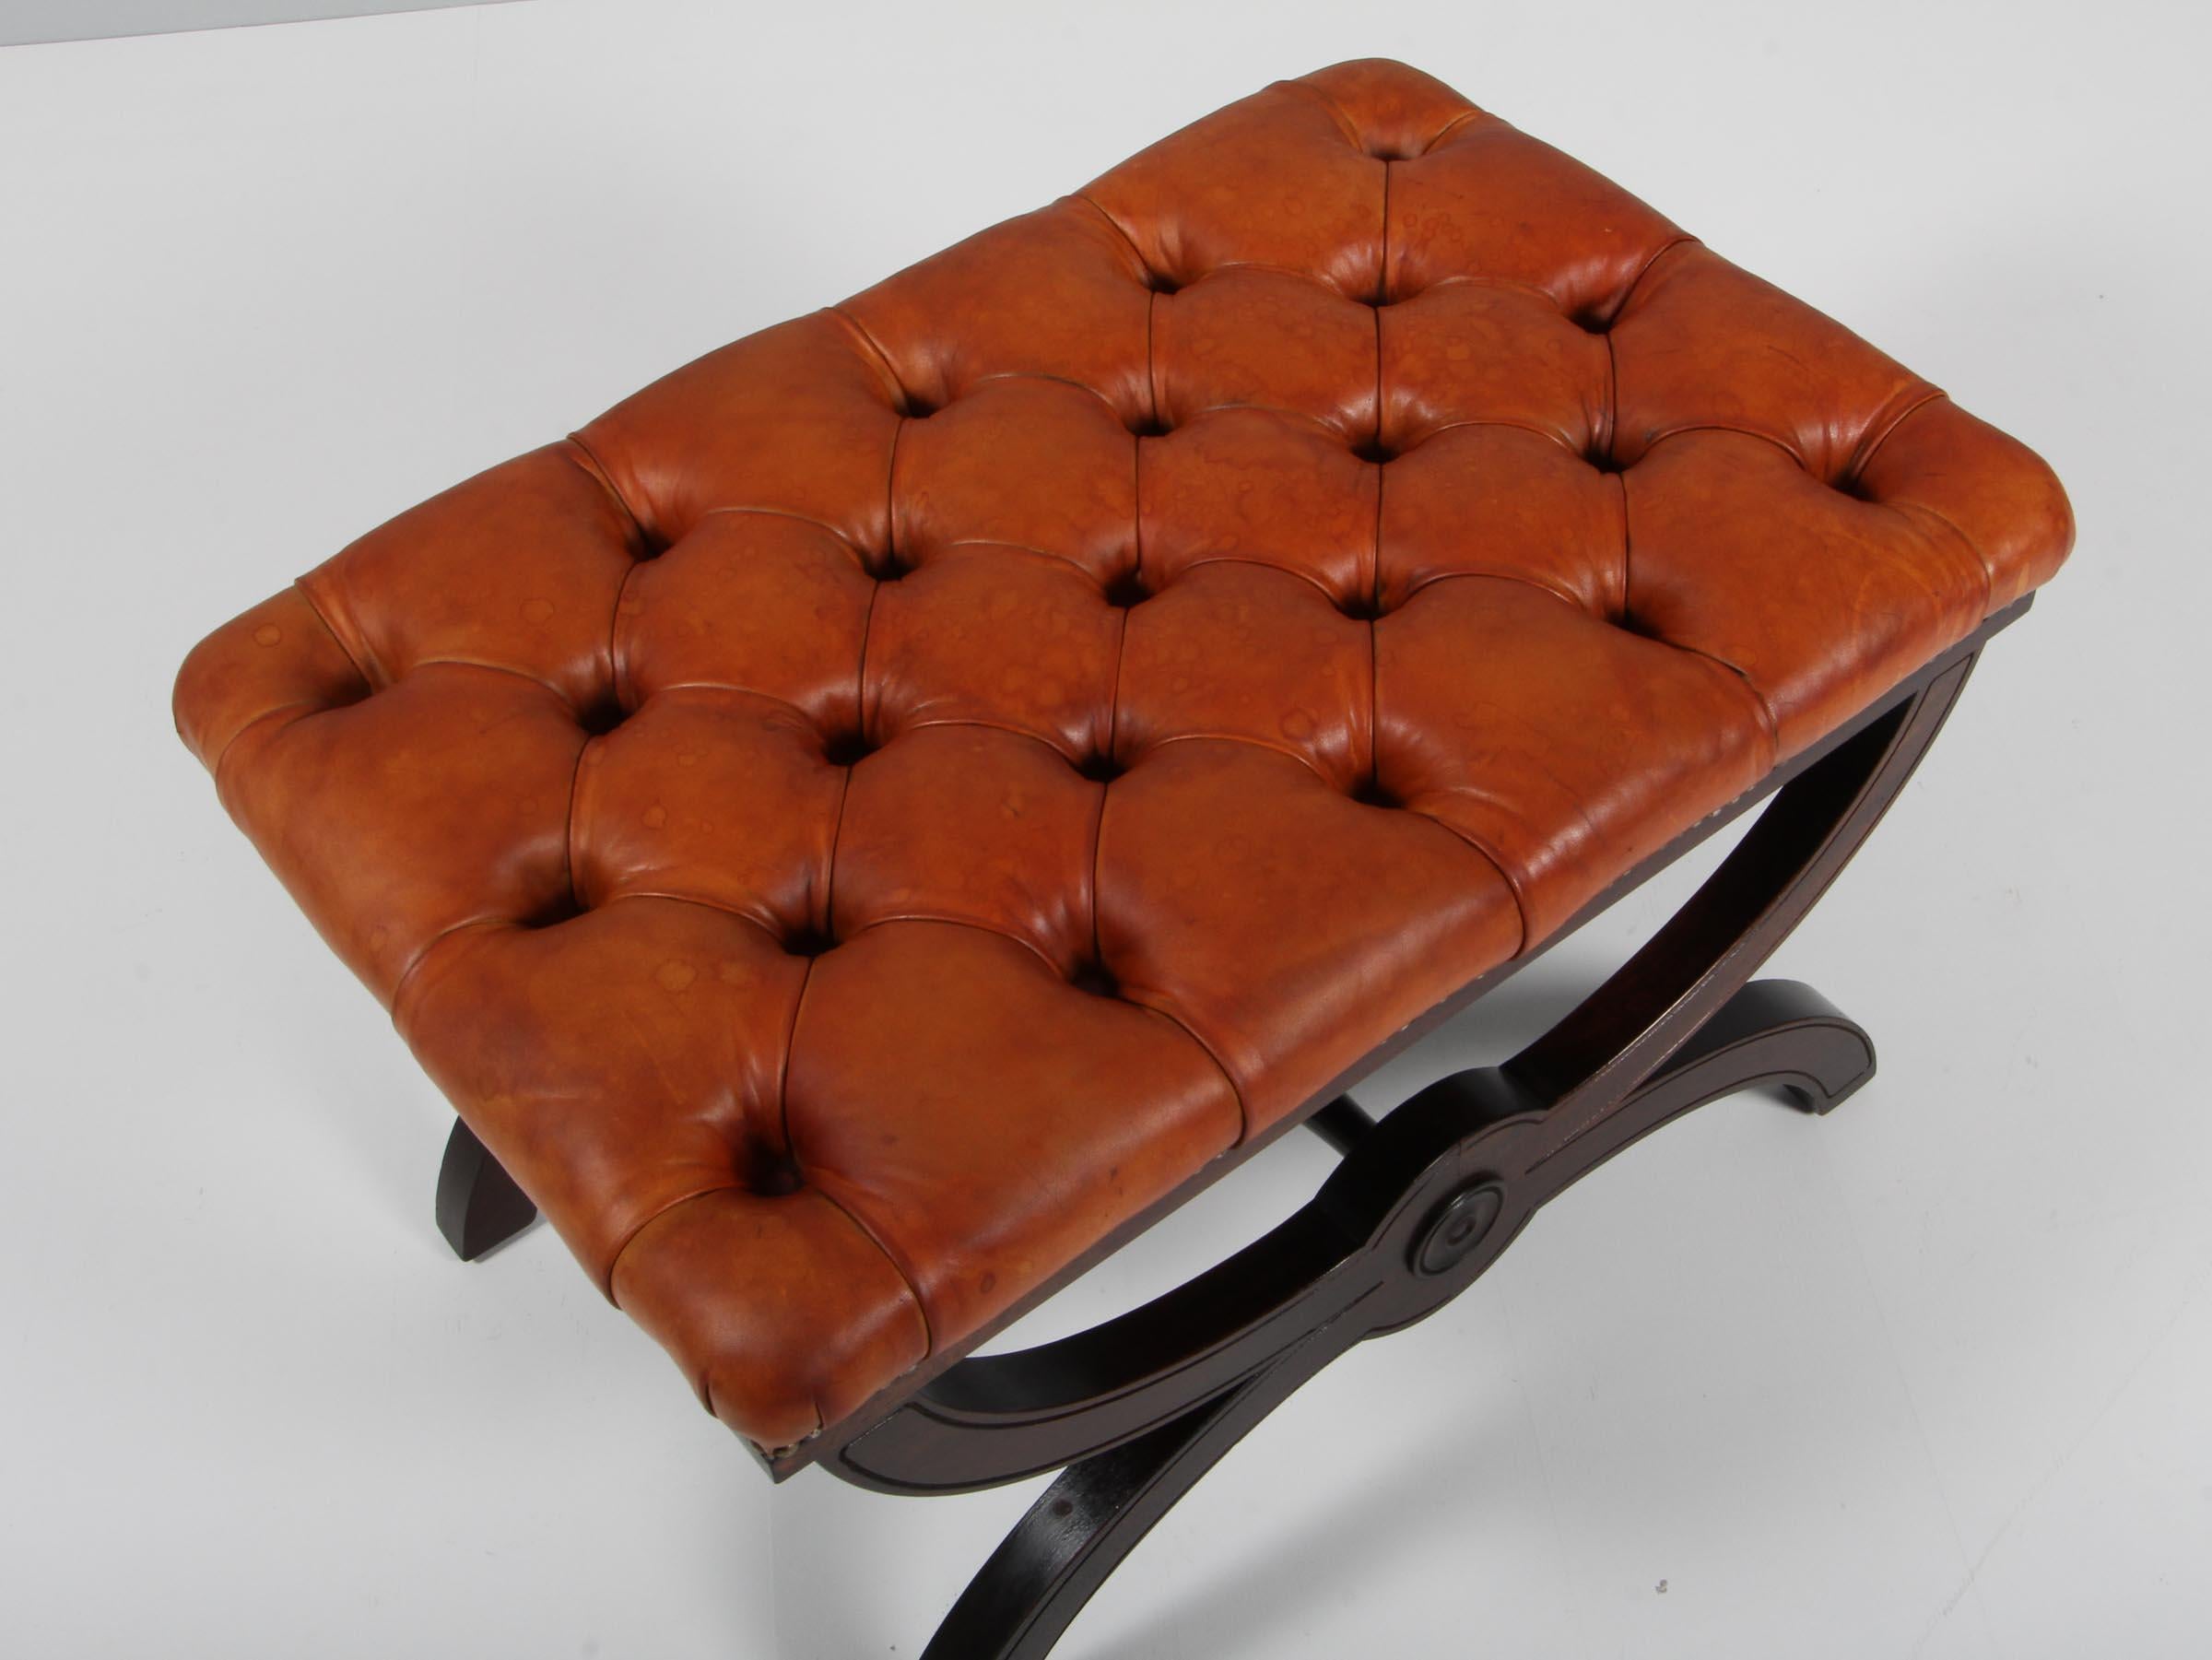 Danish cabinetmaker ottoman of patinated nature leather, with buttons. 

Legs of mahogany with profilated details.

Made in the 1930-1940s.